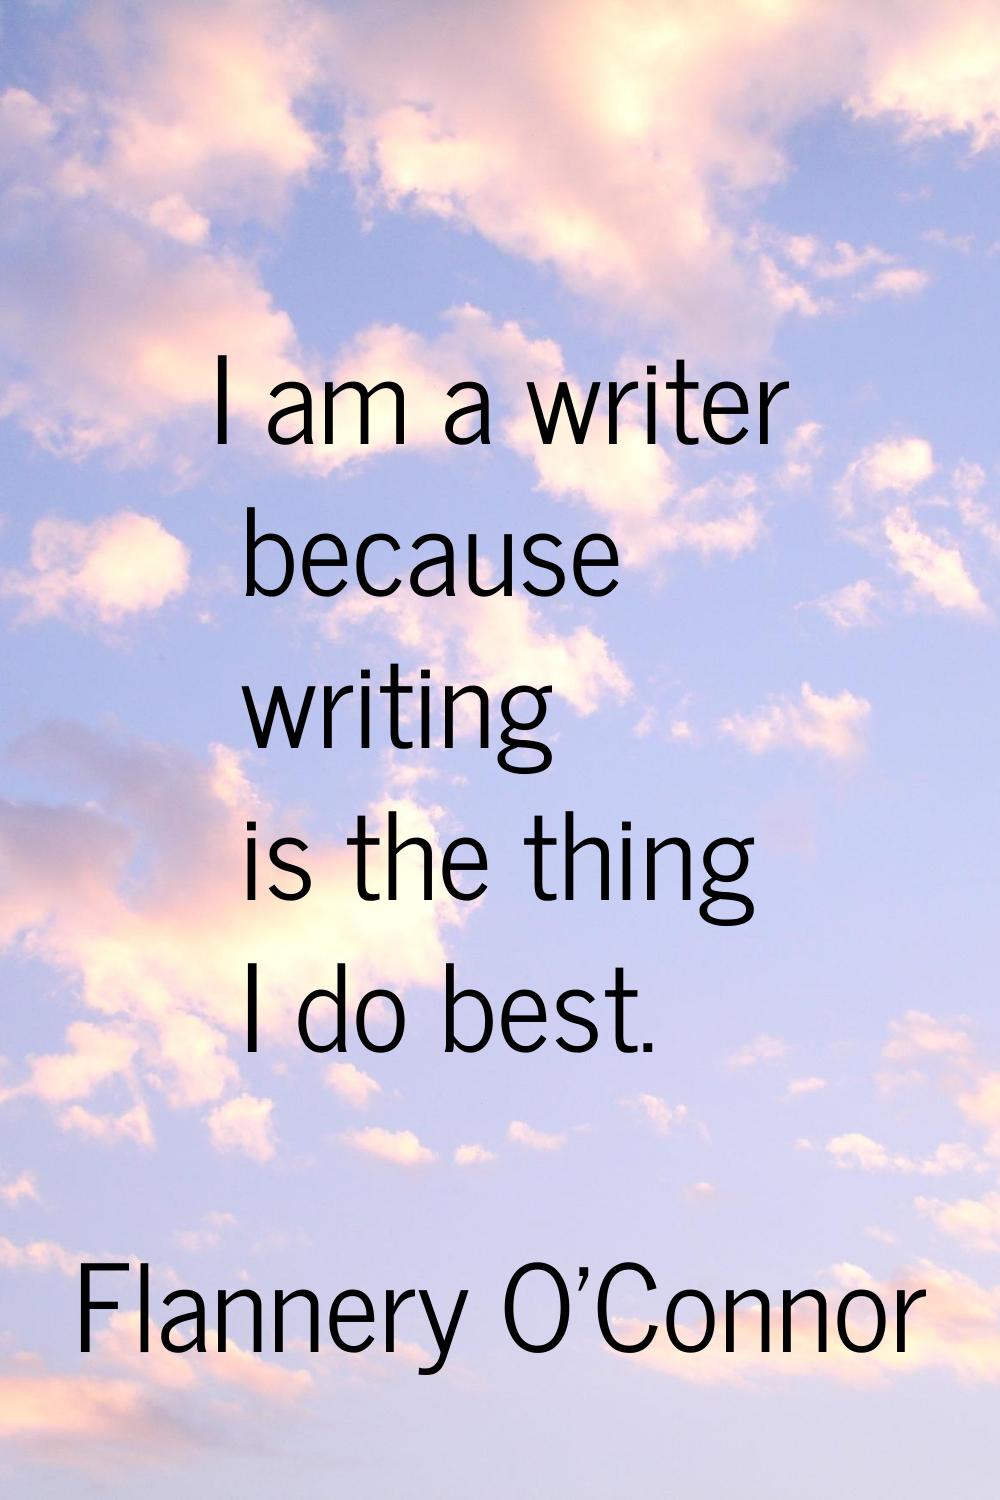 I am a writer because writing is the thing I do best.